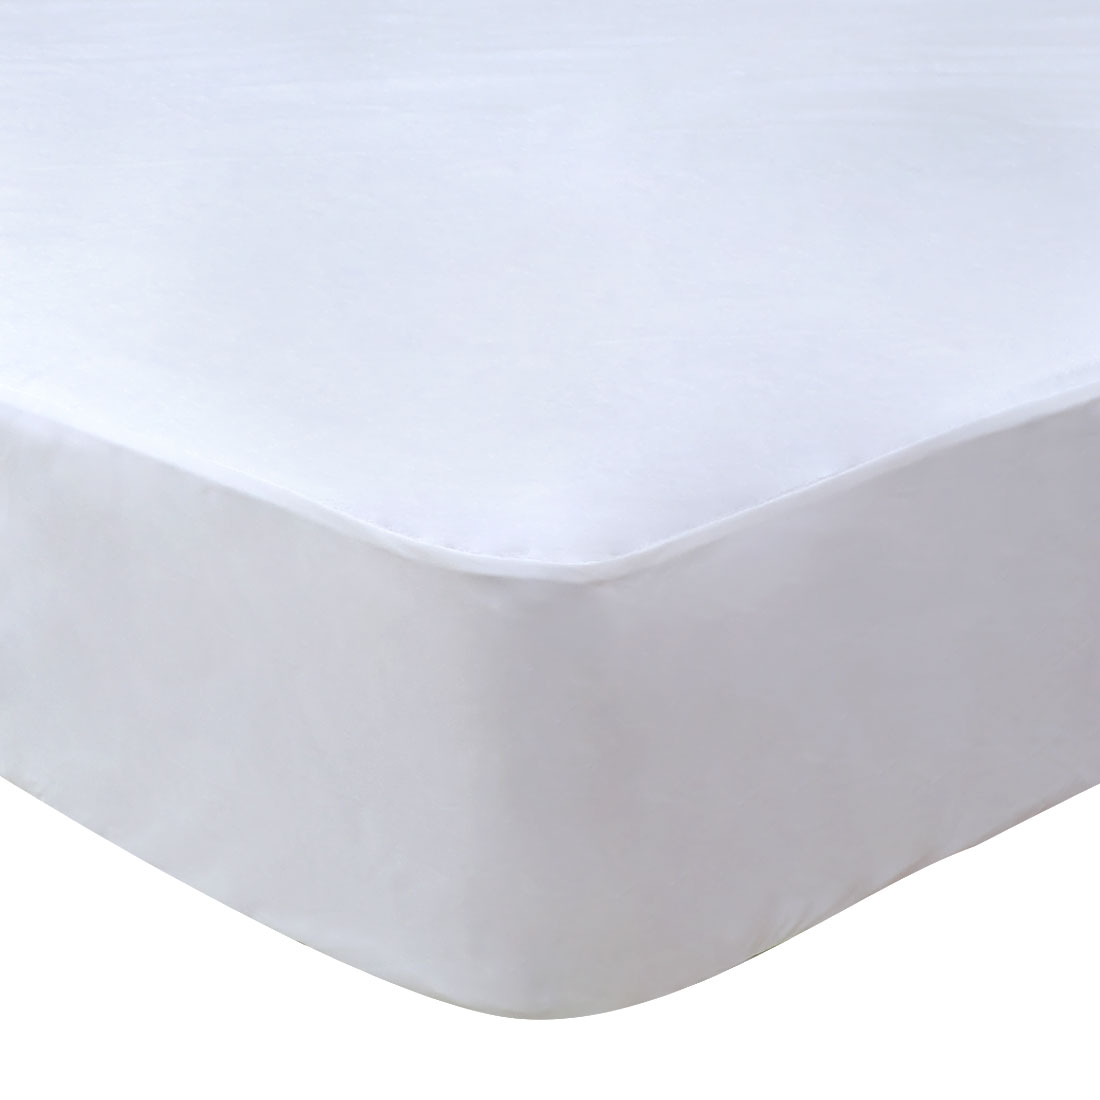 Unique Bargains Cotton Water-resistant Mattress Protector Fitted Breathable California King